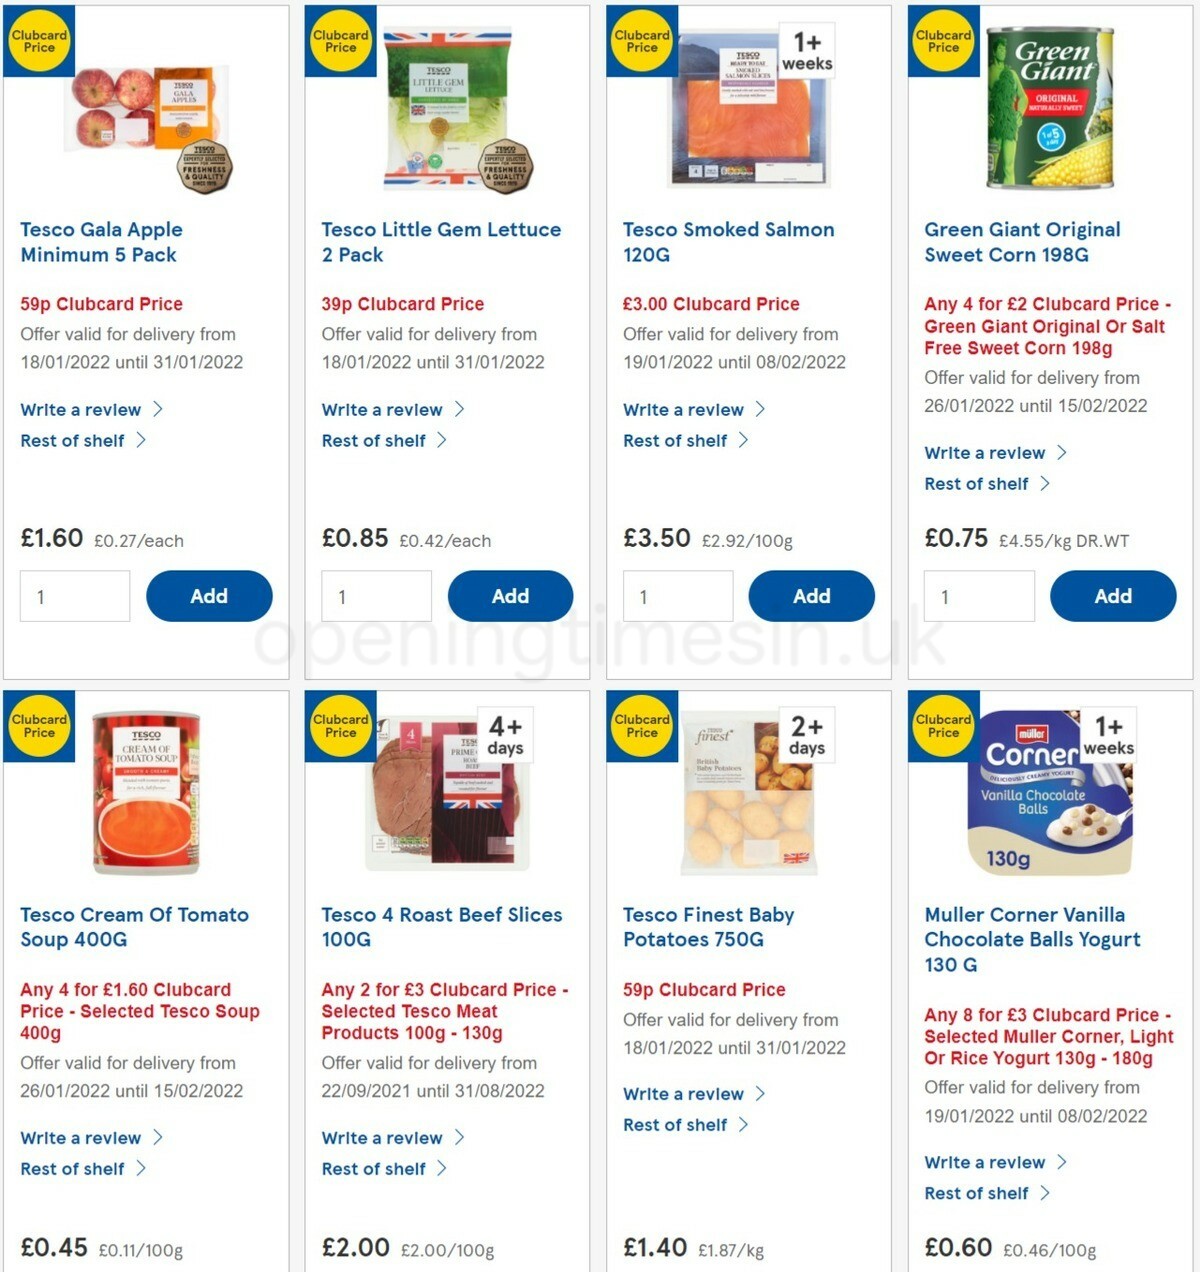 TESCO Offers from 26 January